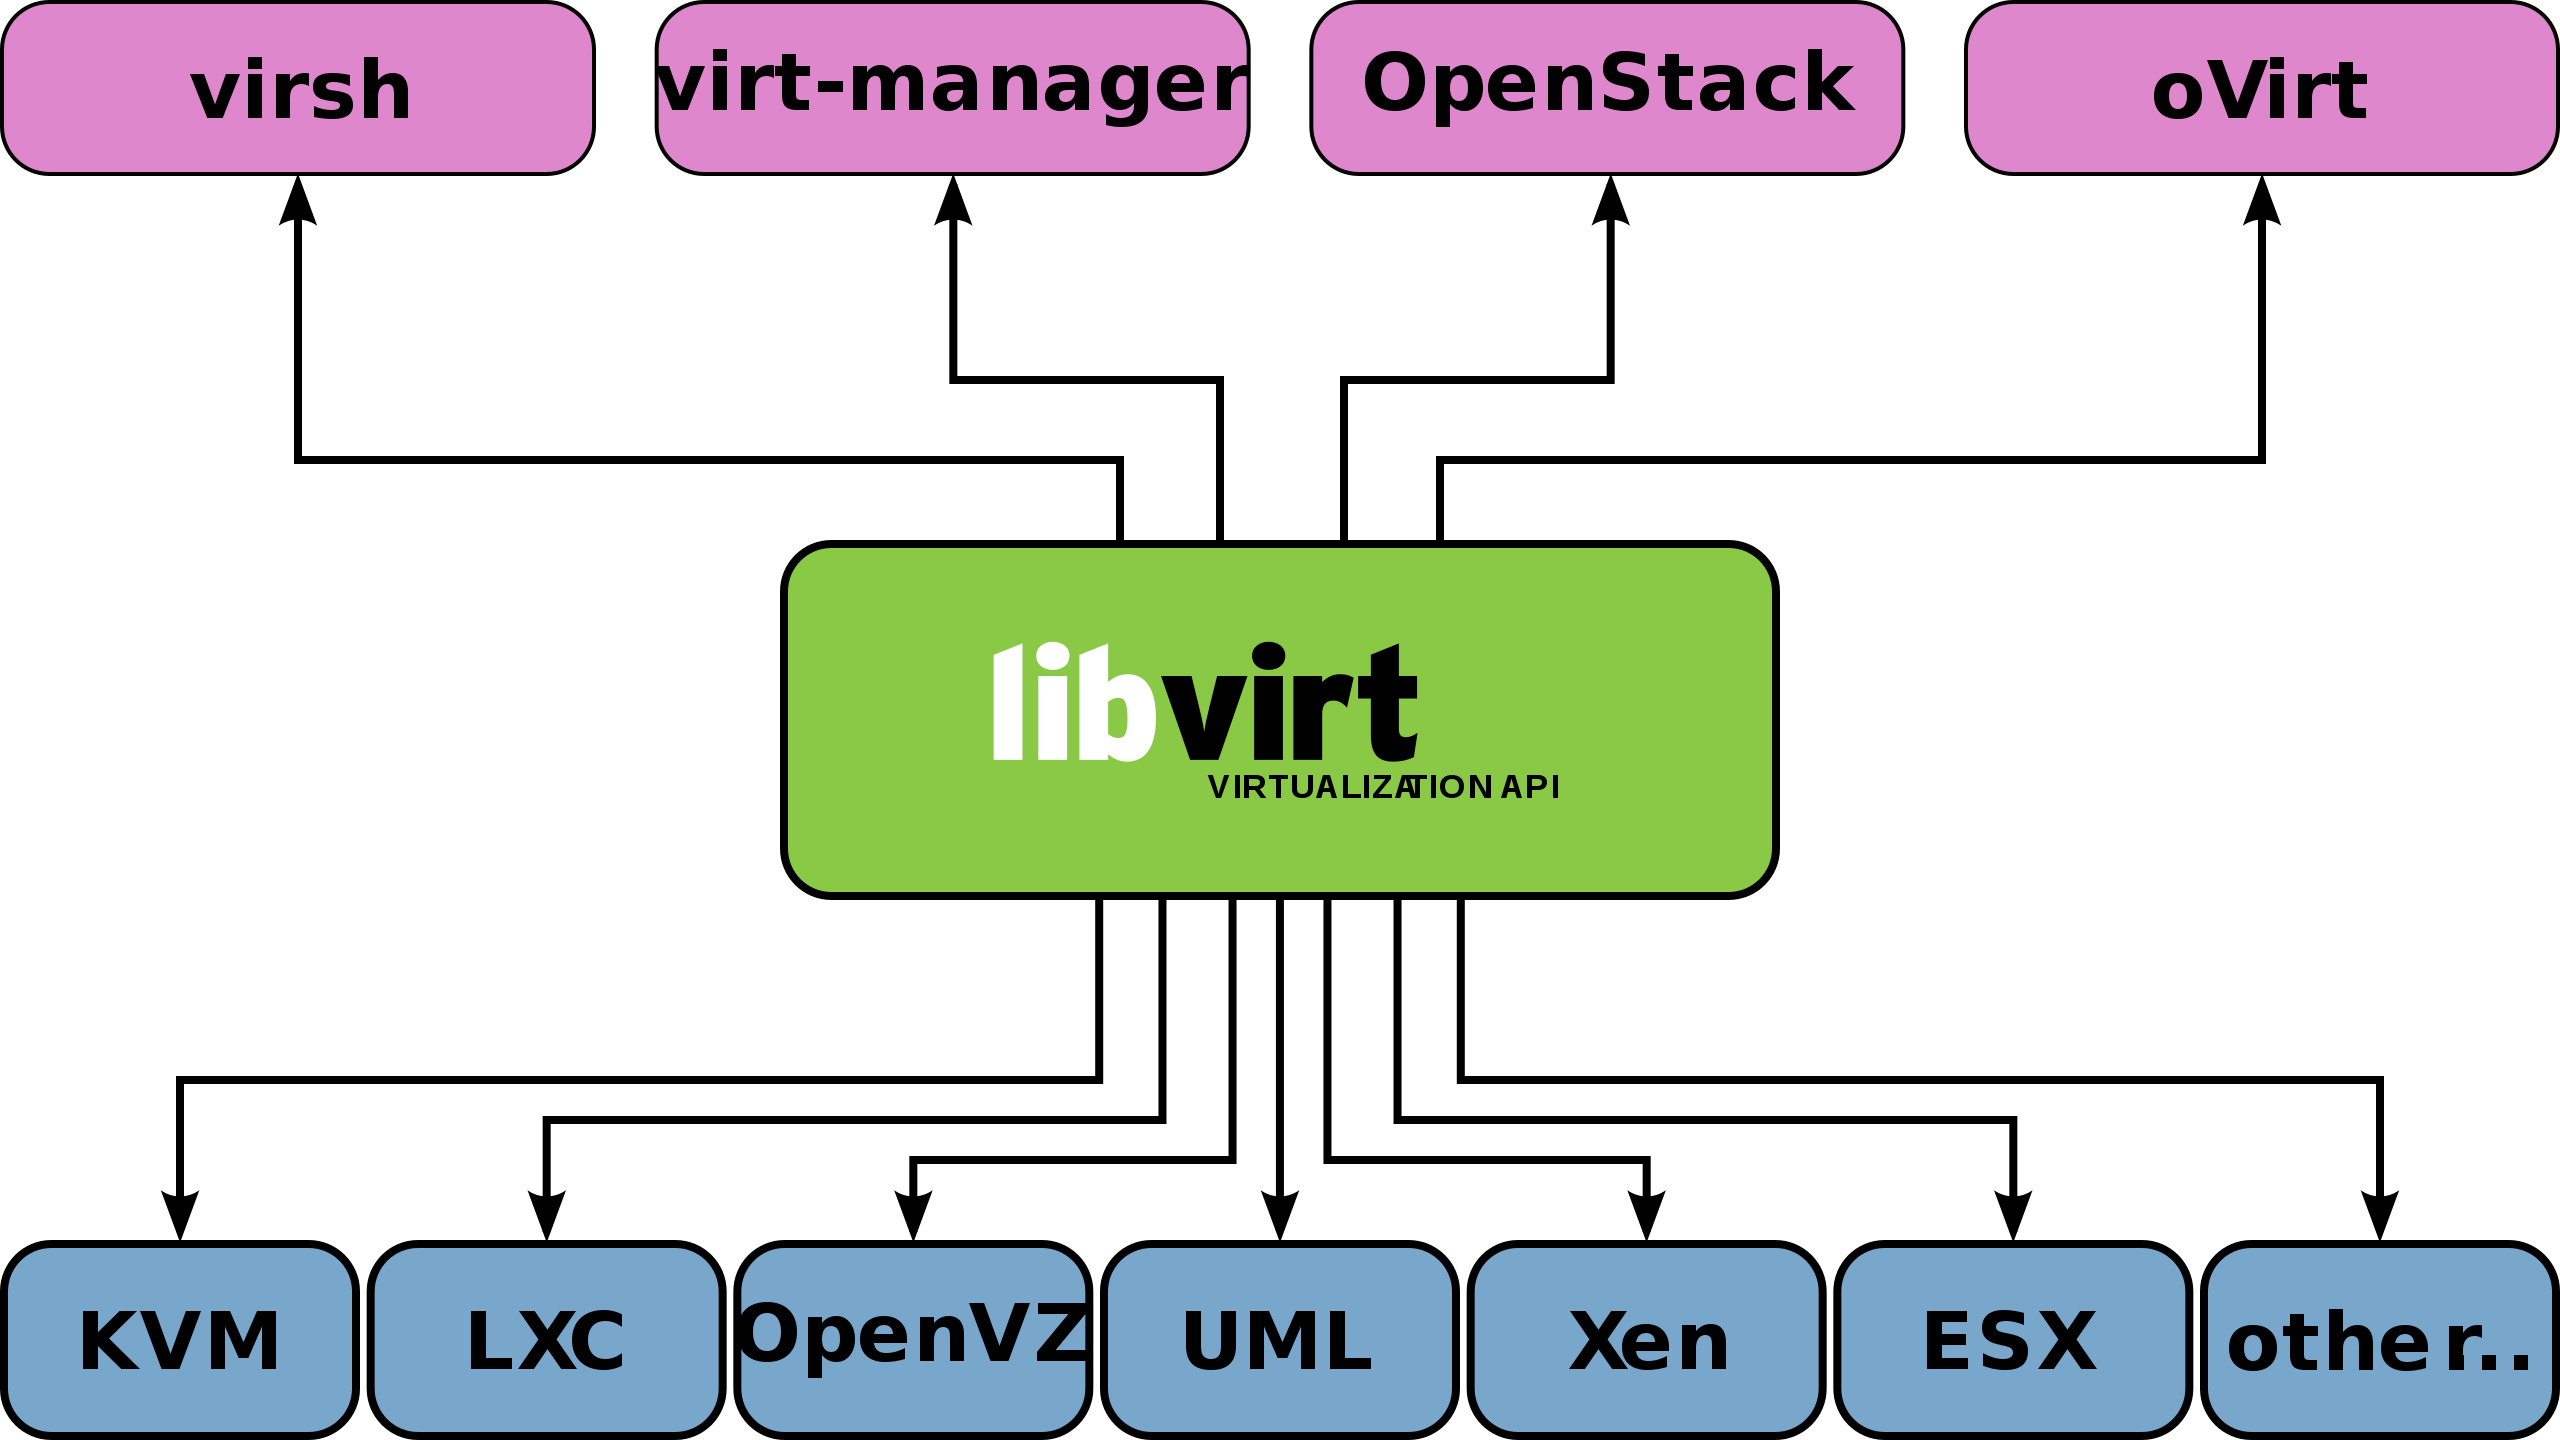 The relationship between libvirt and KVM